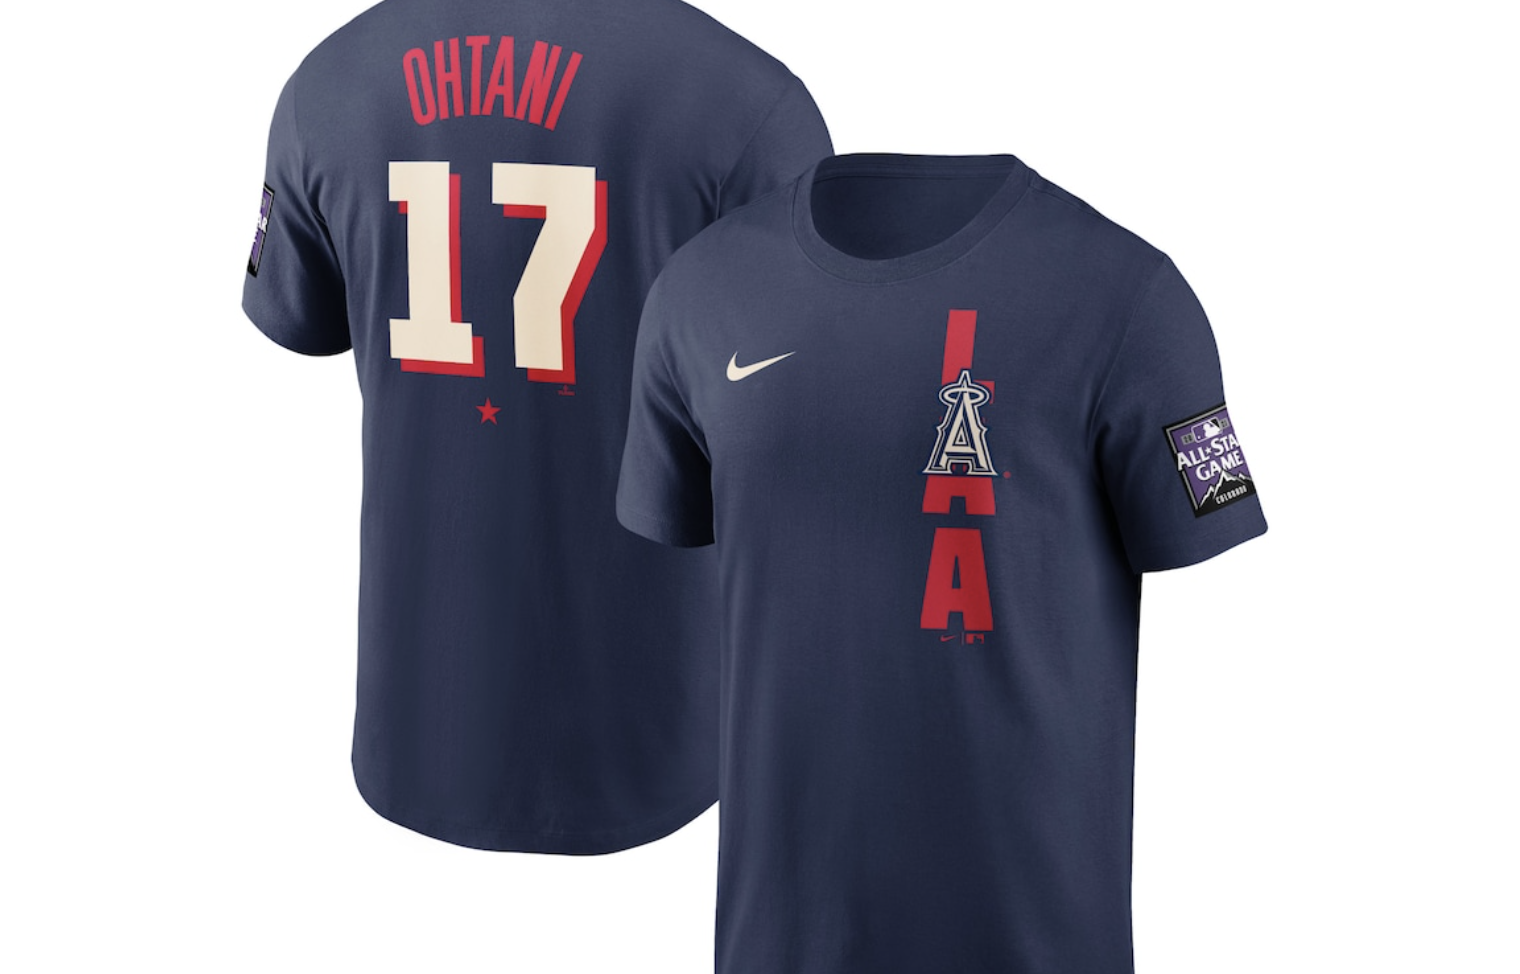 Forbedring Lærerens dag Oxide MLB All-Star Game gear: Shohei Ohtani, Aaron Judge shirts, jerseys, hats |  Where to buy online - syracuse.com